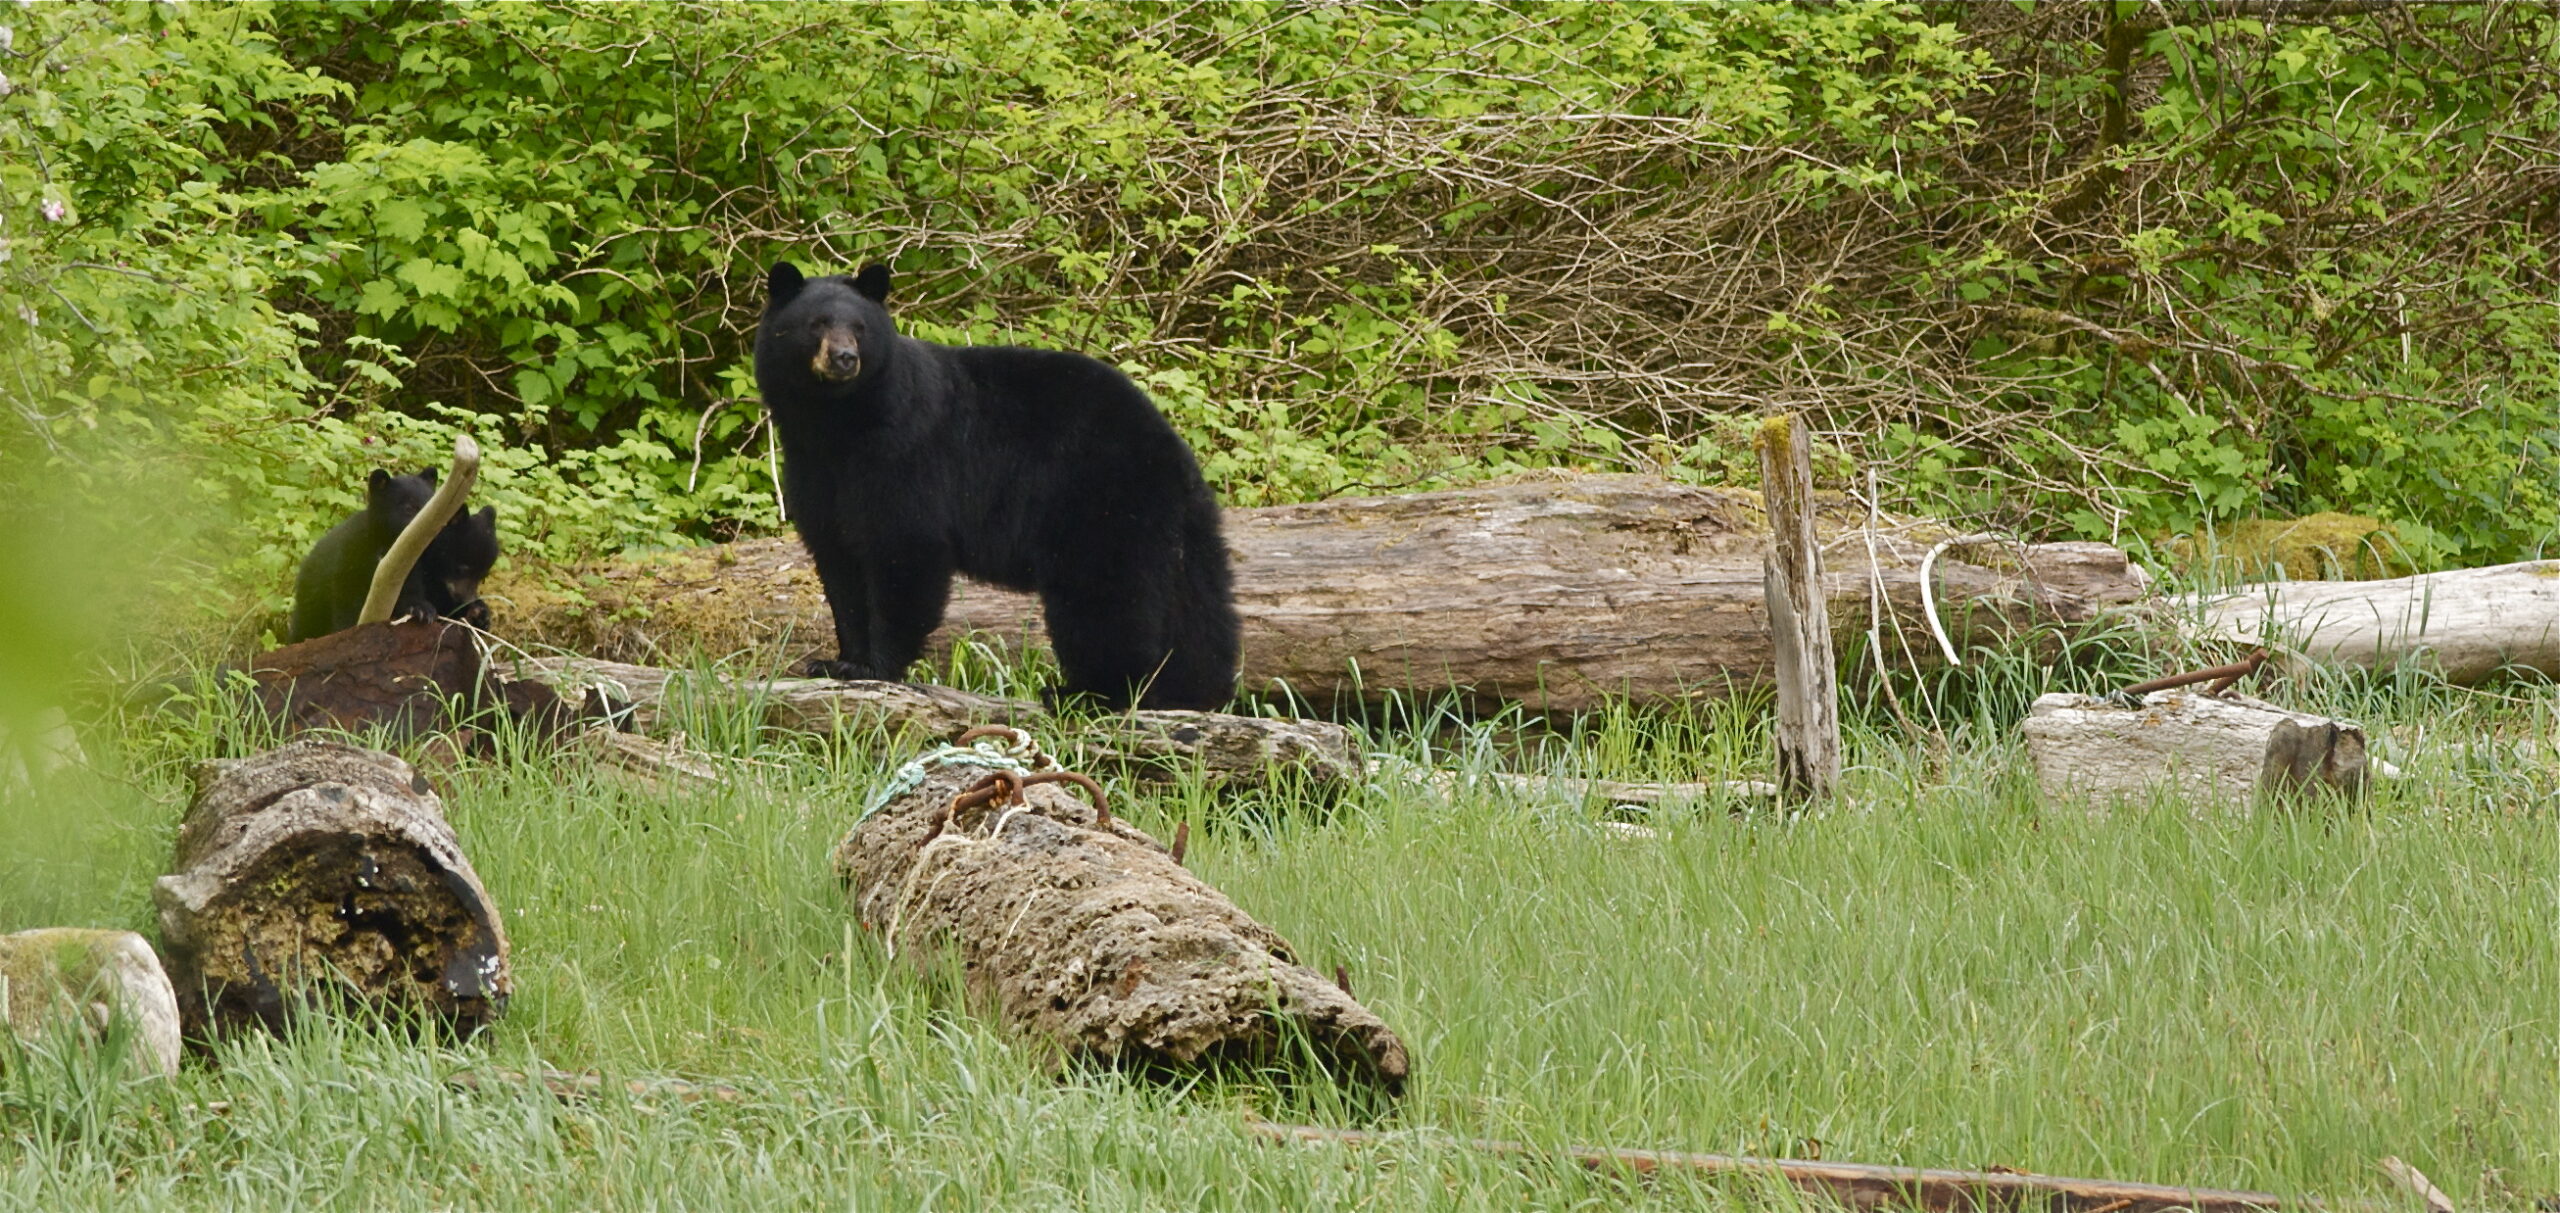 A black bear and a cub standing in a grassy area.